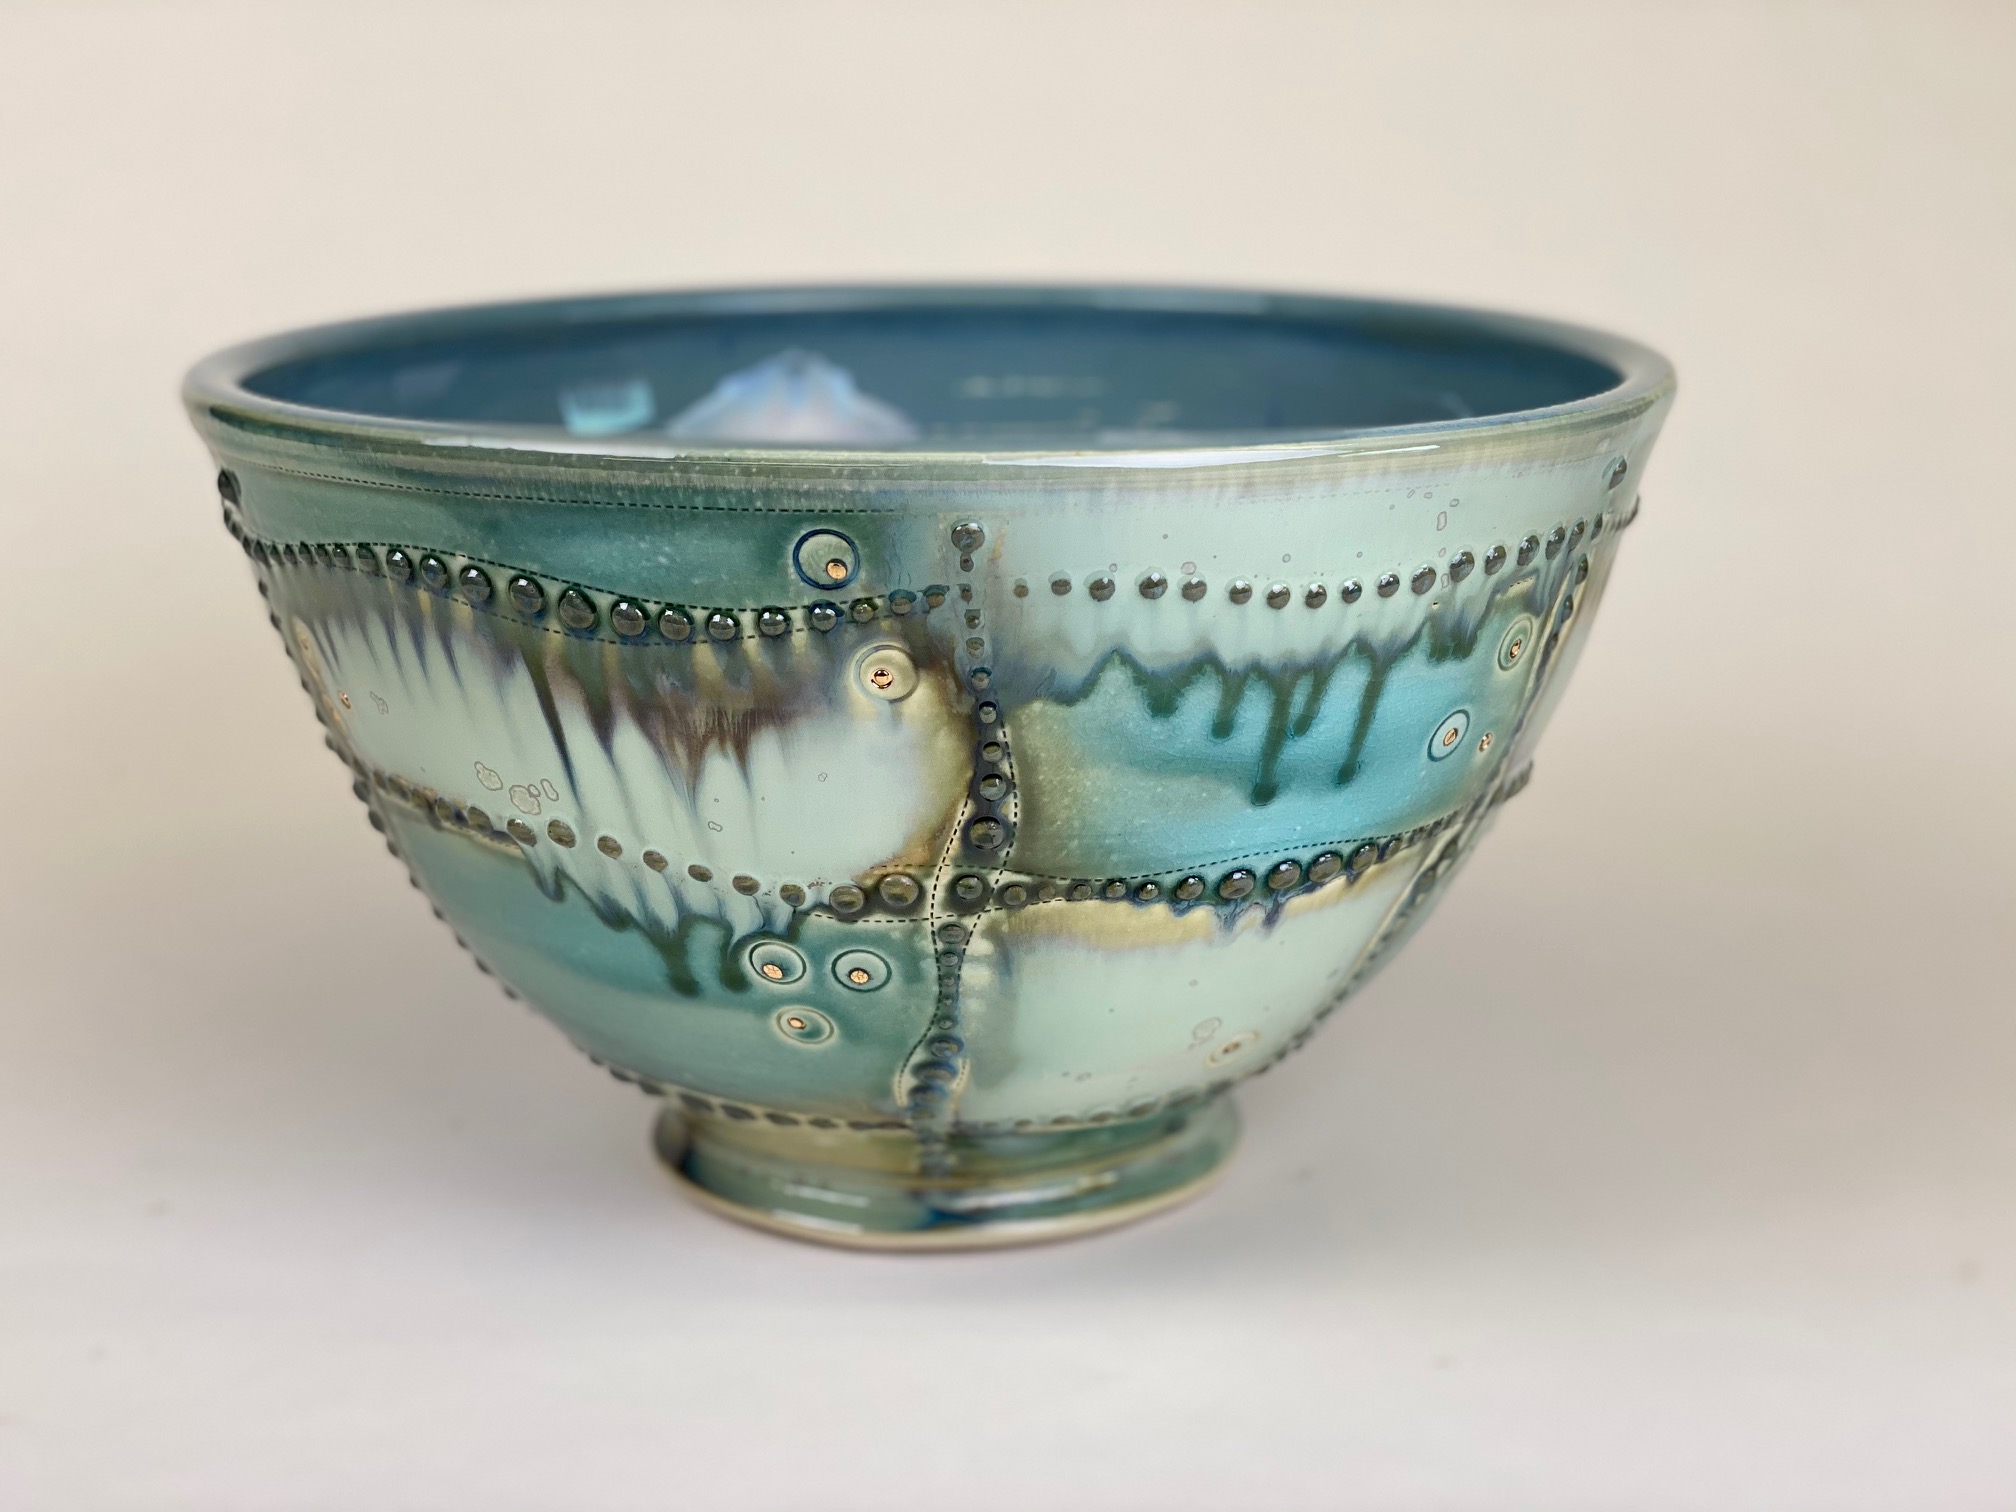 Michael D. Lemke’s serving bowl, 16 in. (41 cm) in diameter, wheel-thrown porcelain, fired to cone 6 in oxidation, 2020.